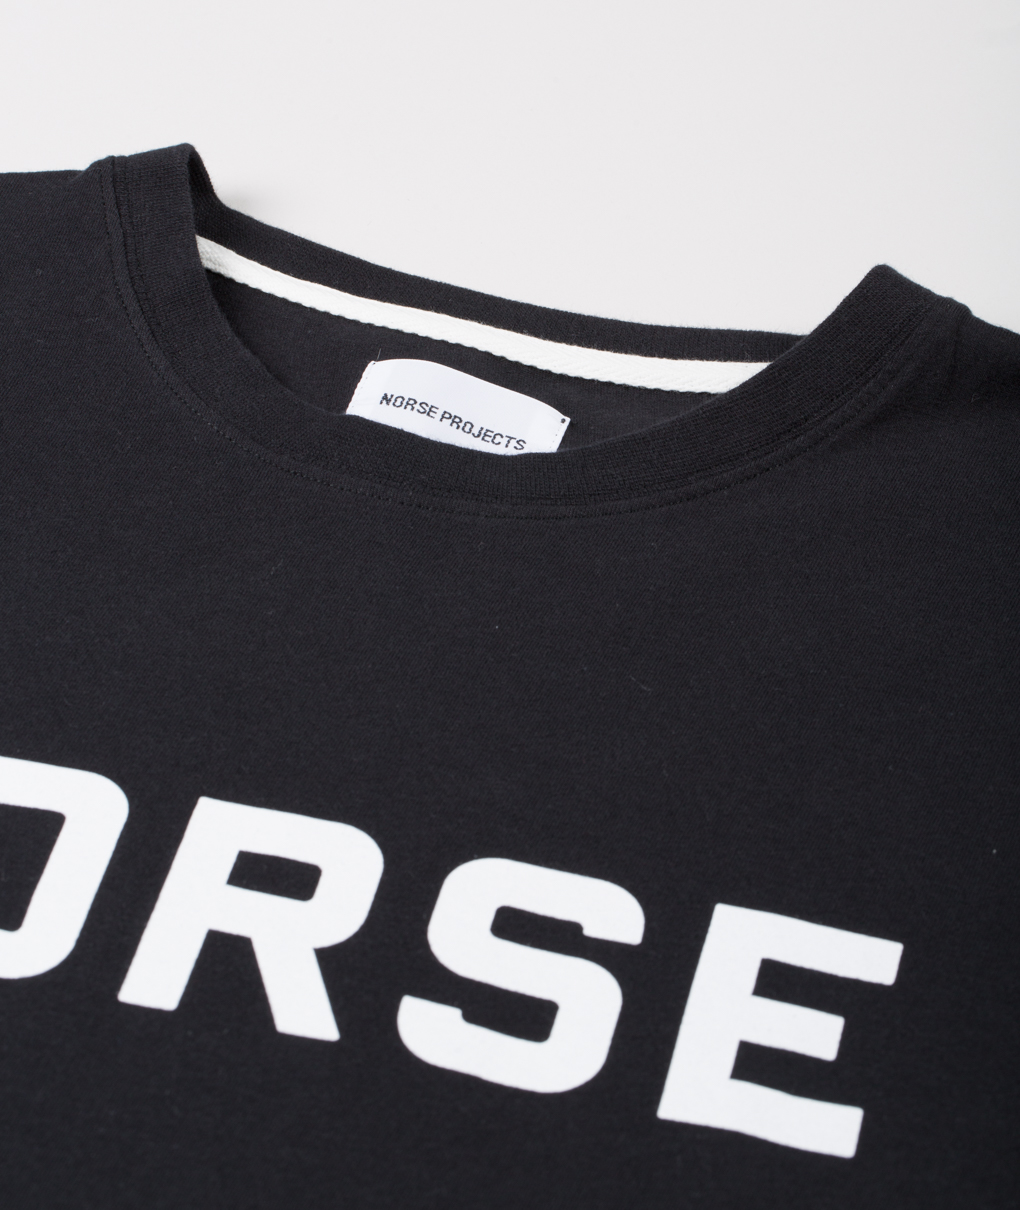 Norse projects Logos